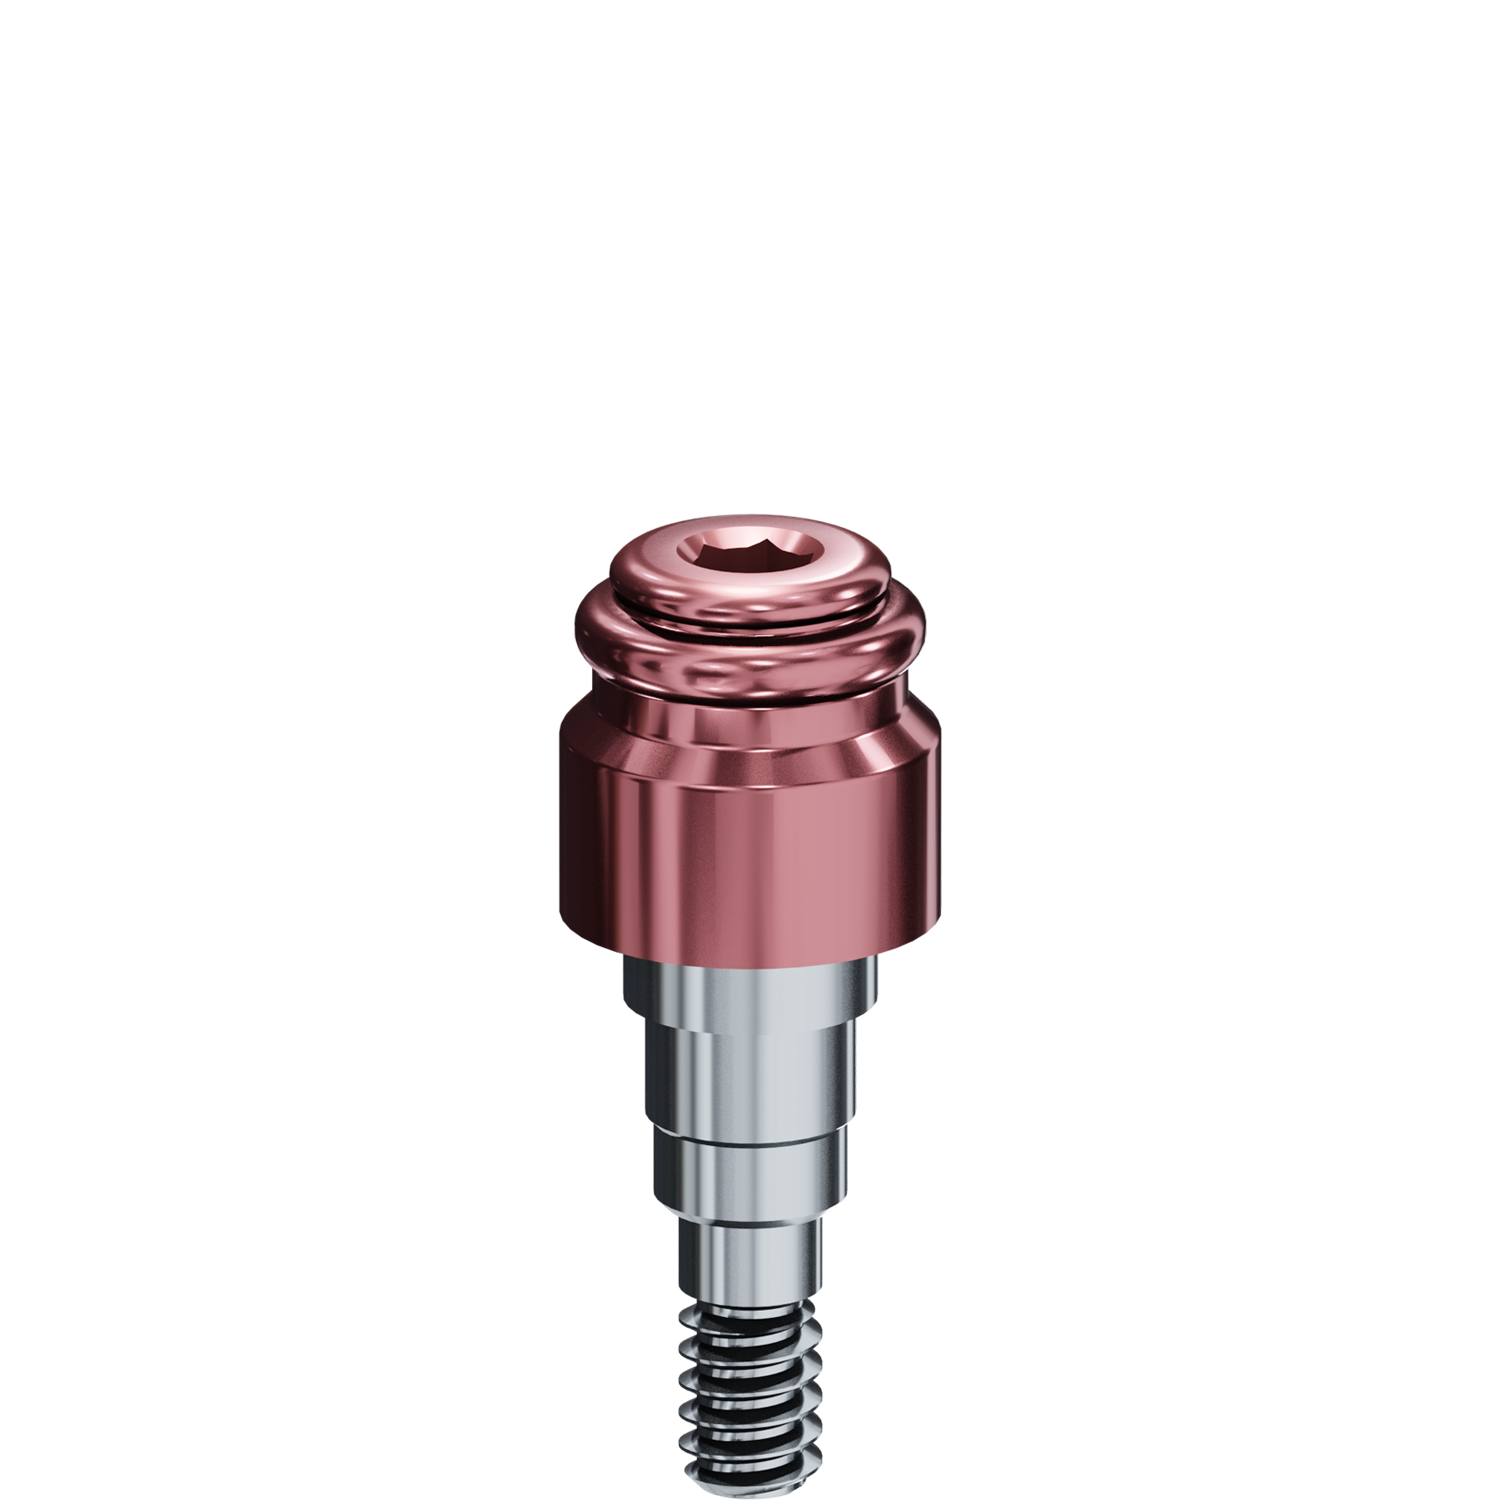 R-Tx Attachment System - Biomet 3i® - 4.1mm Certain Connection - 0.048" Drive - 1.0mm